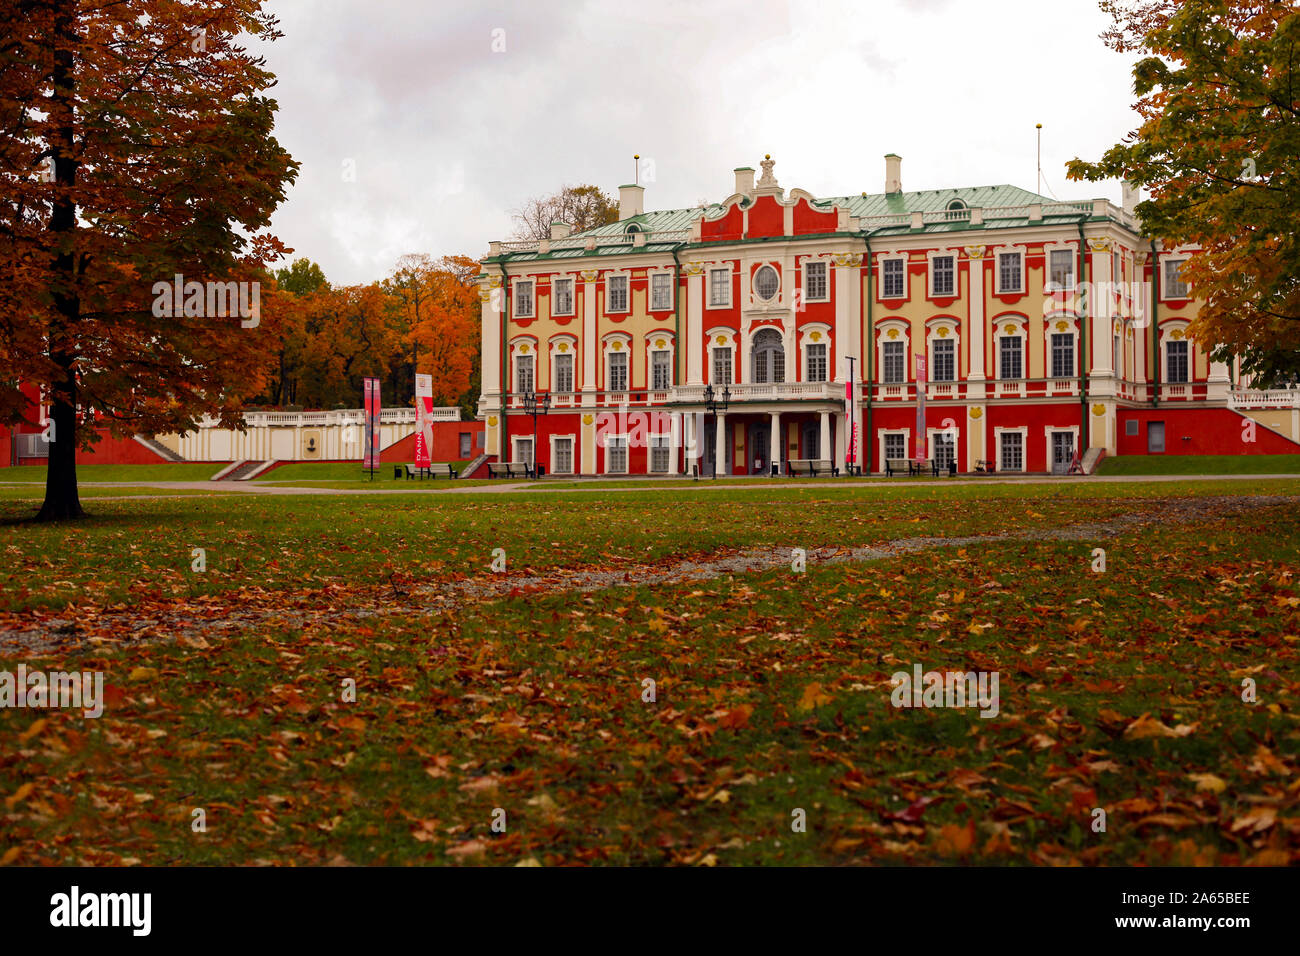 TALLINN, ESTONIA - 6 OKTOBER 2019. President Palace. The Baroque Building named Kadriorg Palace was built by Tsar Peter the Great in the 18th Century Stock Photo